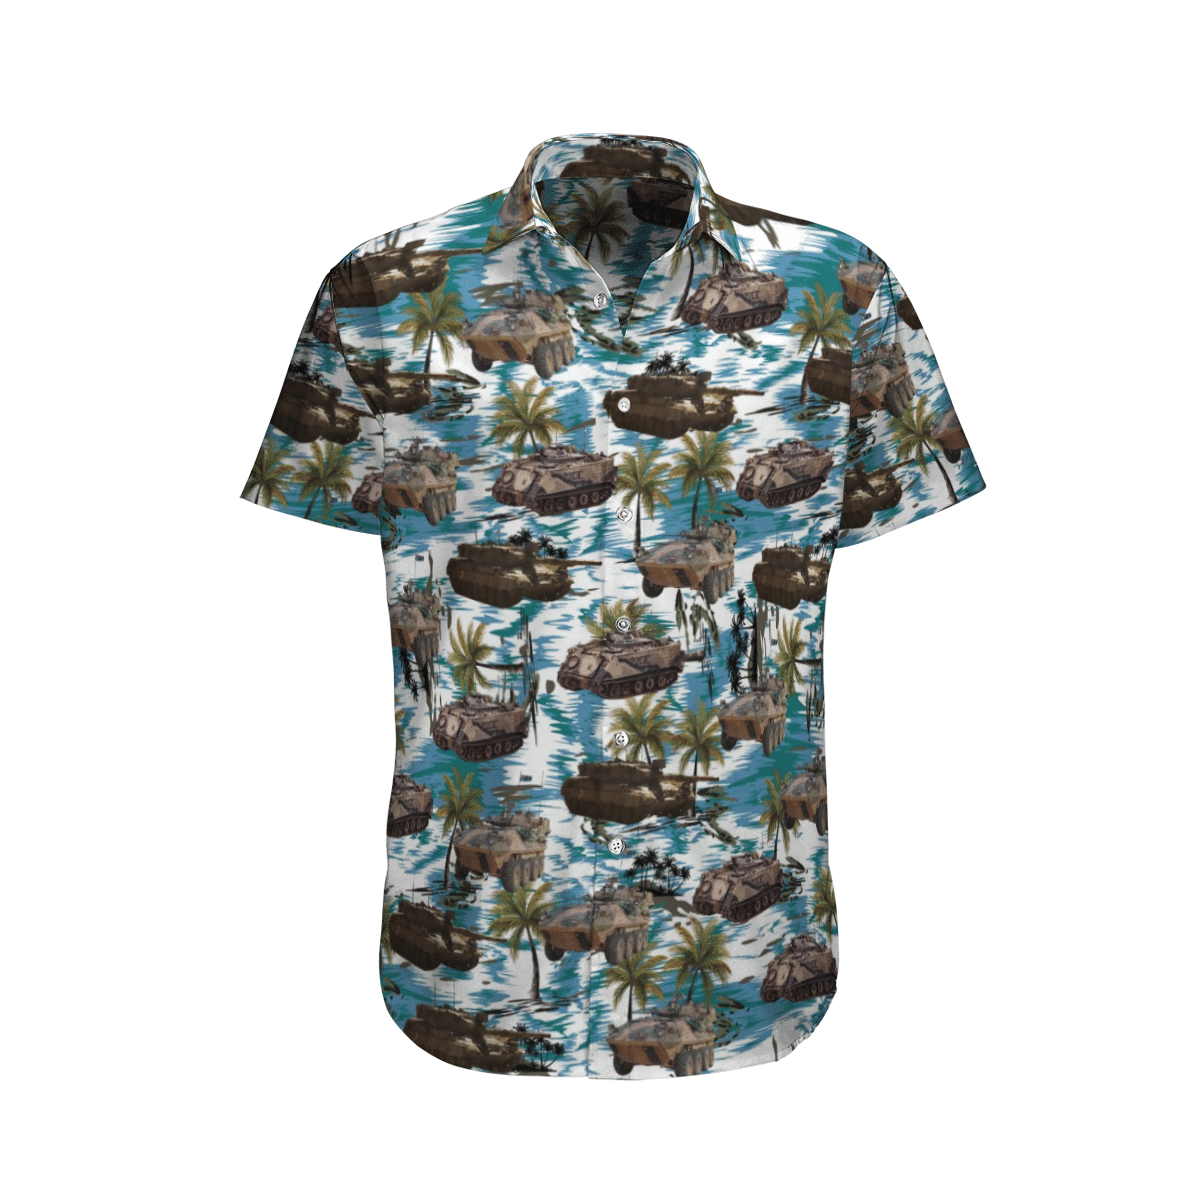 Aslav And Leopard  Blue High Quality Unisex Hawaiian Shirt For Men And Women Dhc17063271